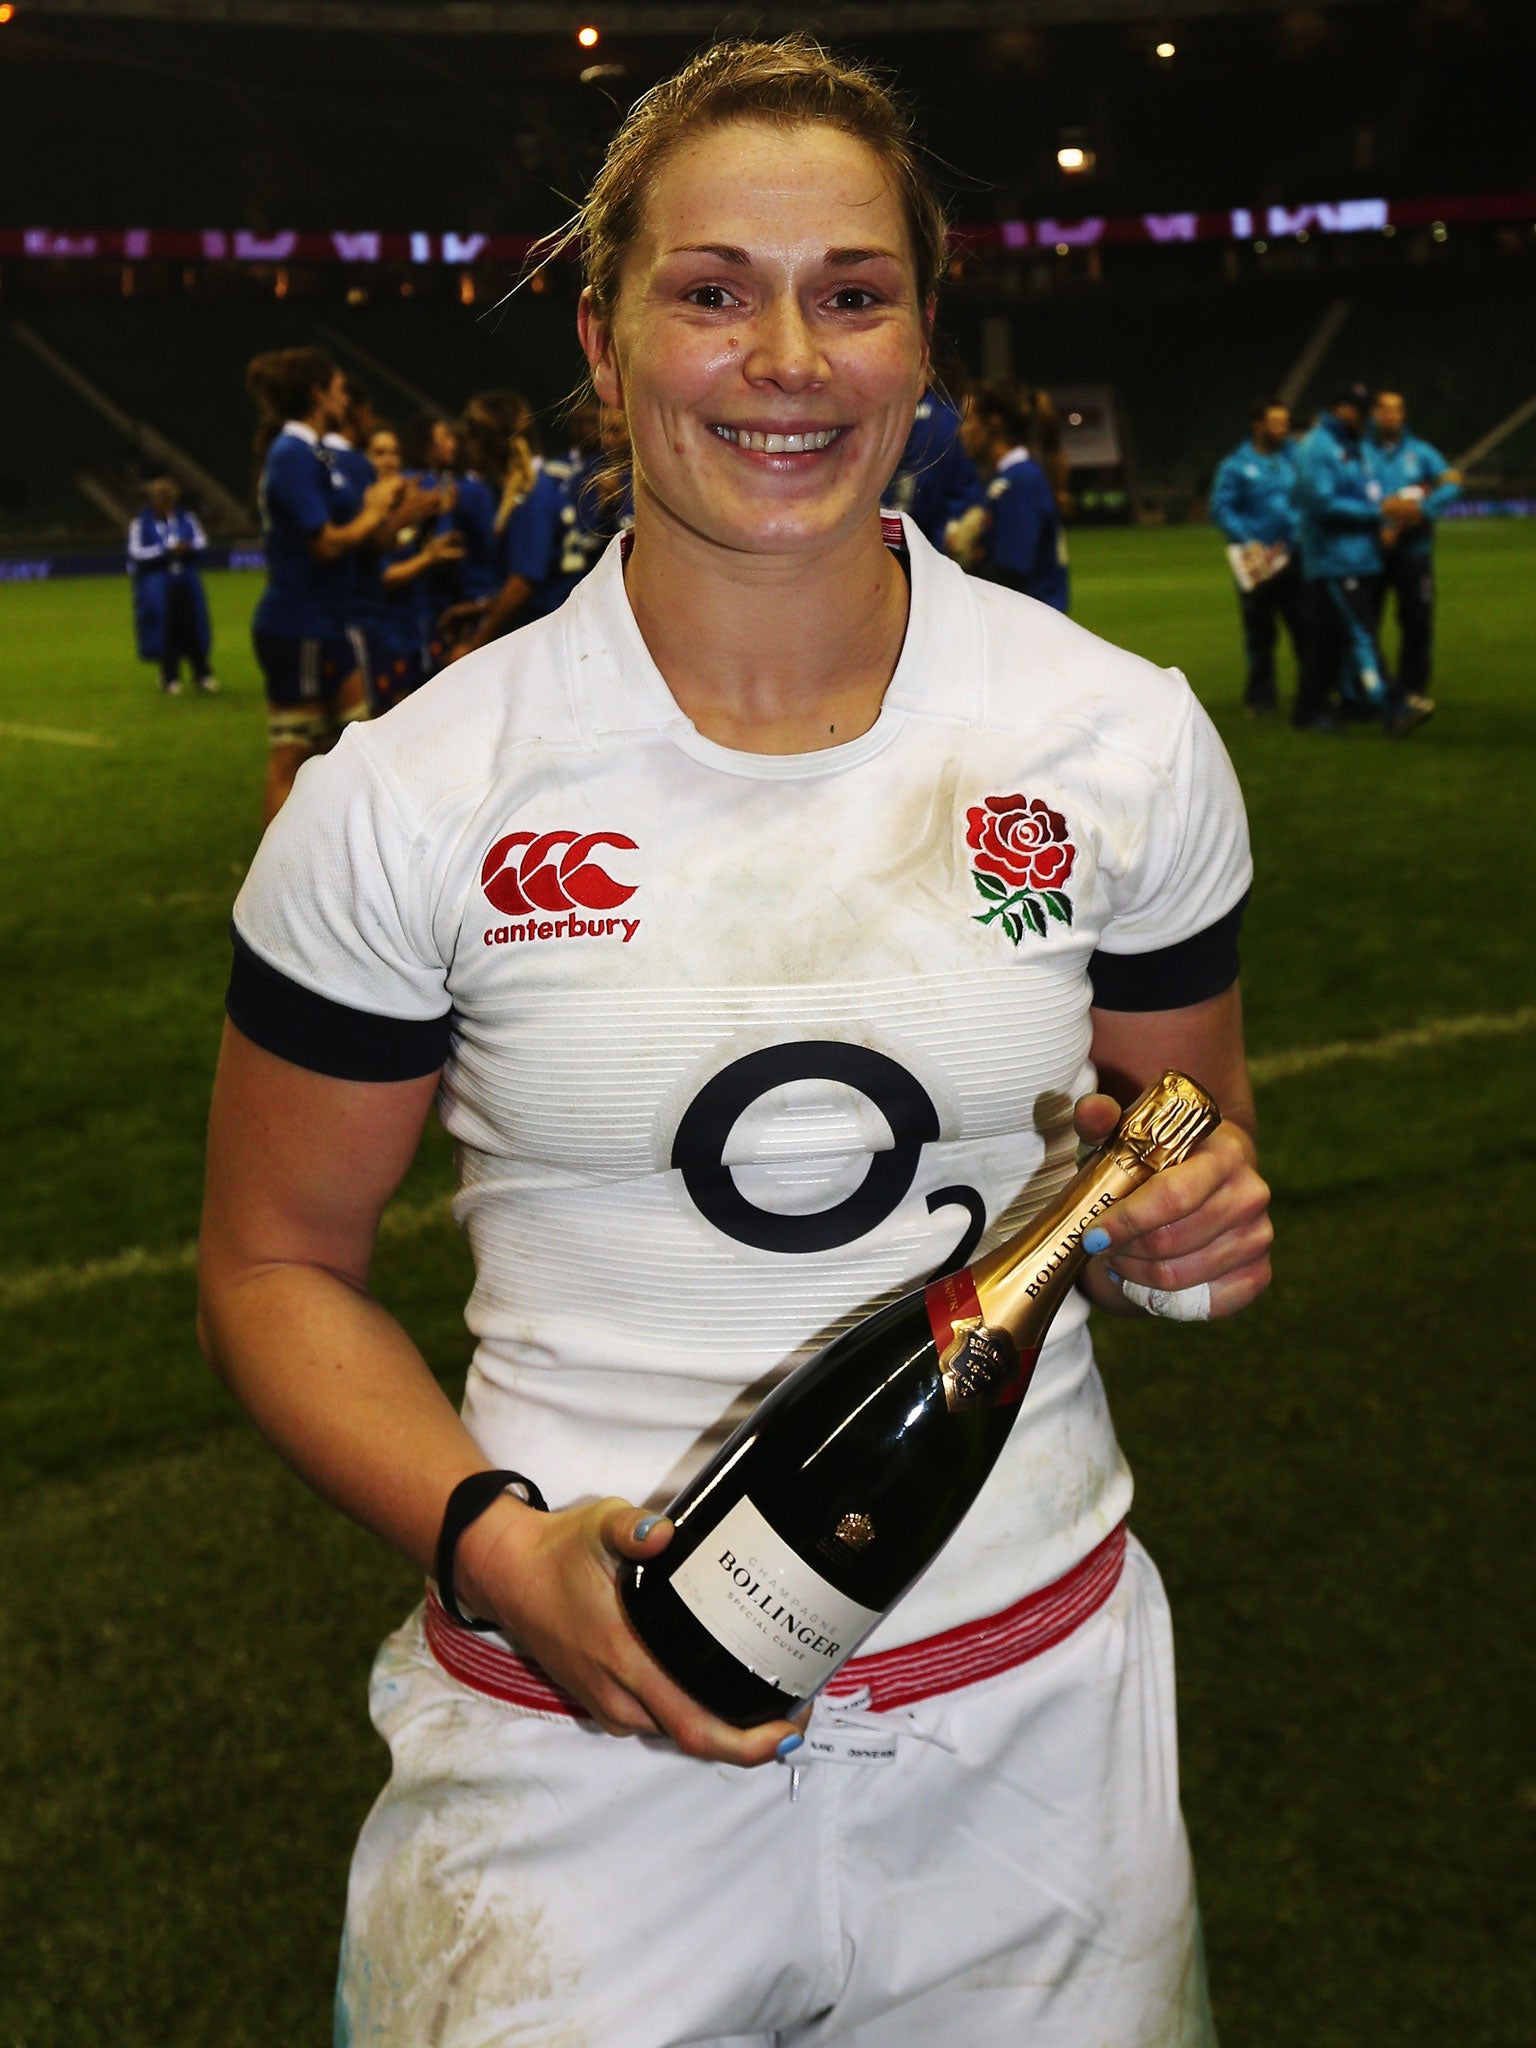 Rachel Burford starred in England’s 40-20 triumph over France